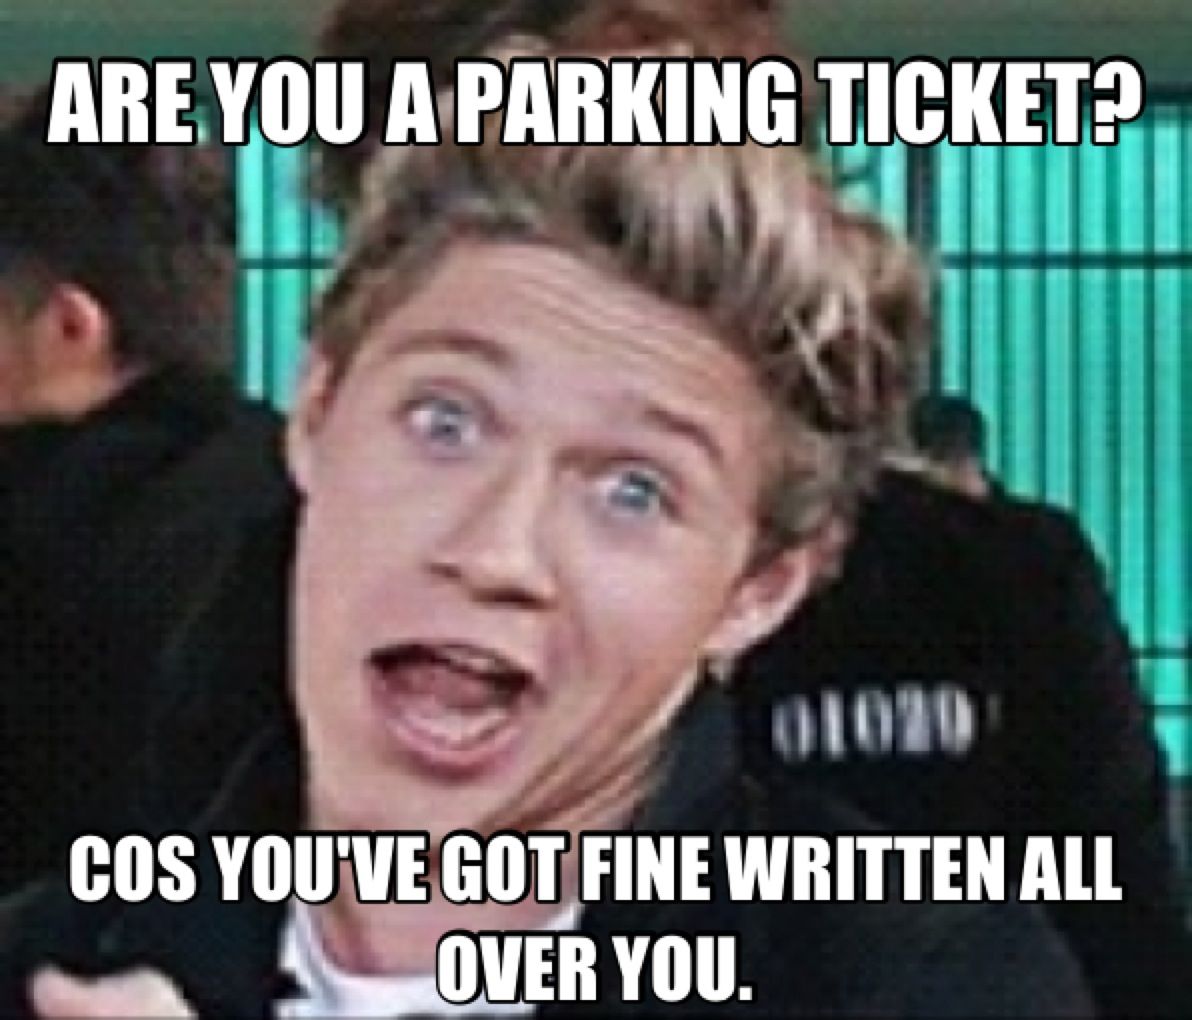 pick up line memes for him - Are You A Parking Ticket? 01020 Cos You'Ve Got Fine Written All Over You.